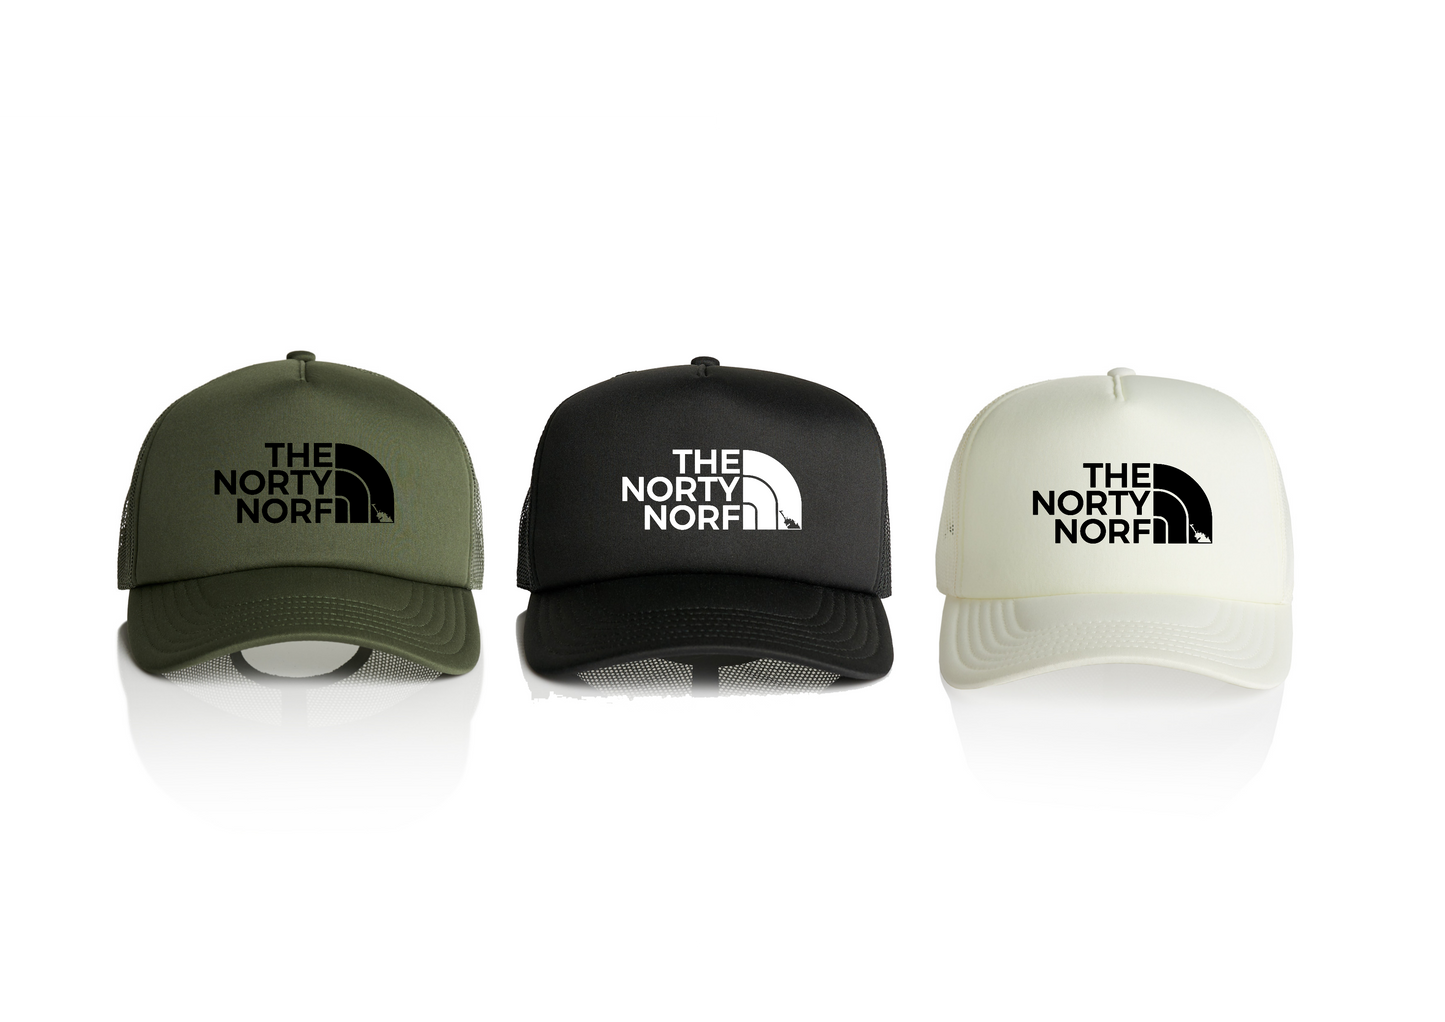 The Norty Norf Caps